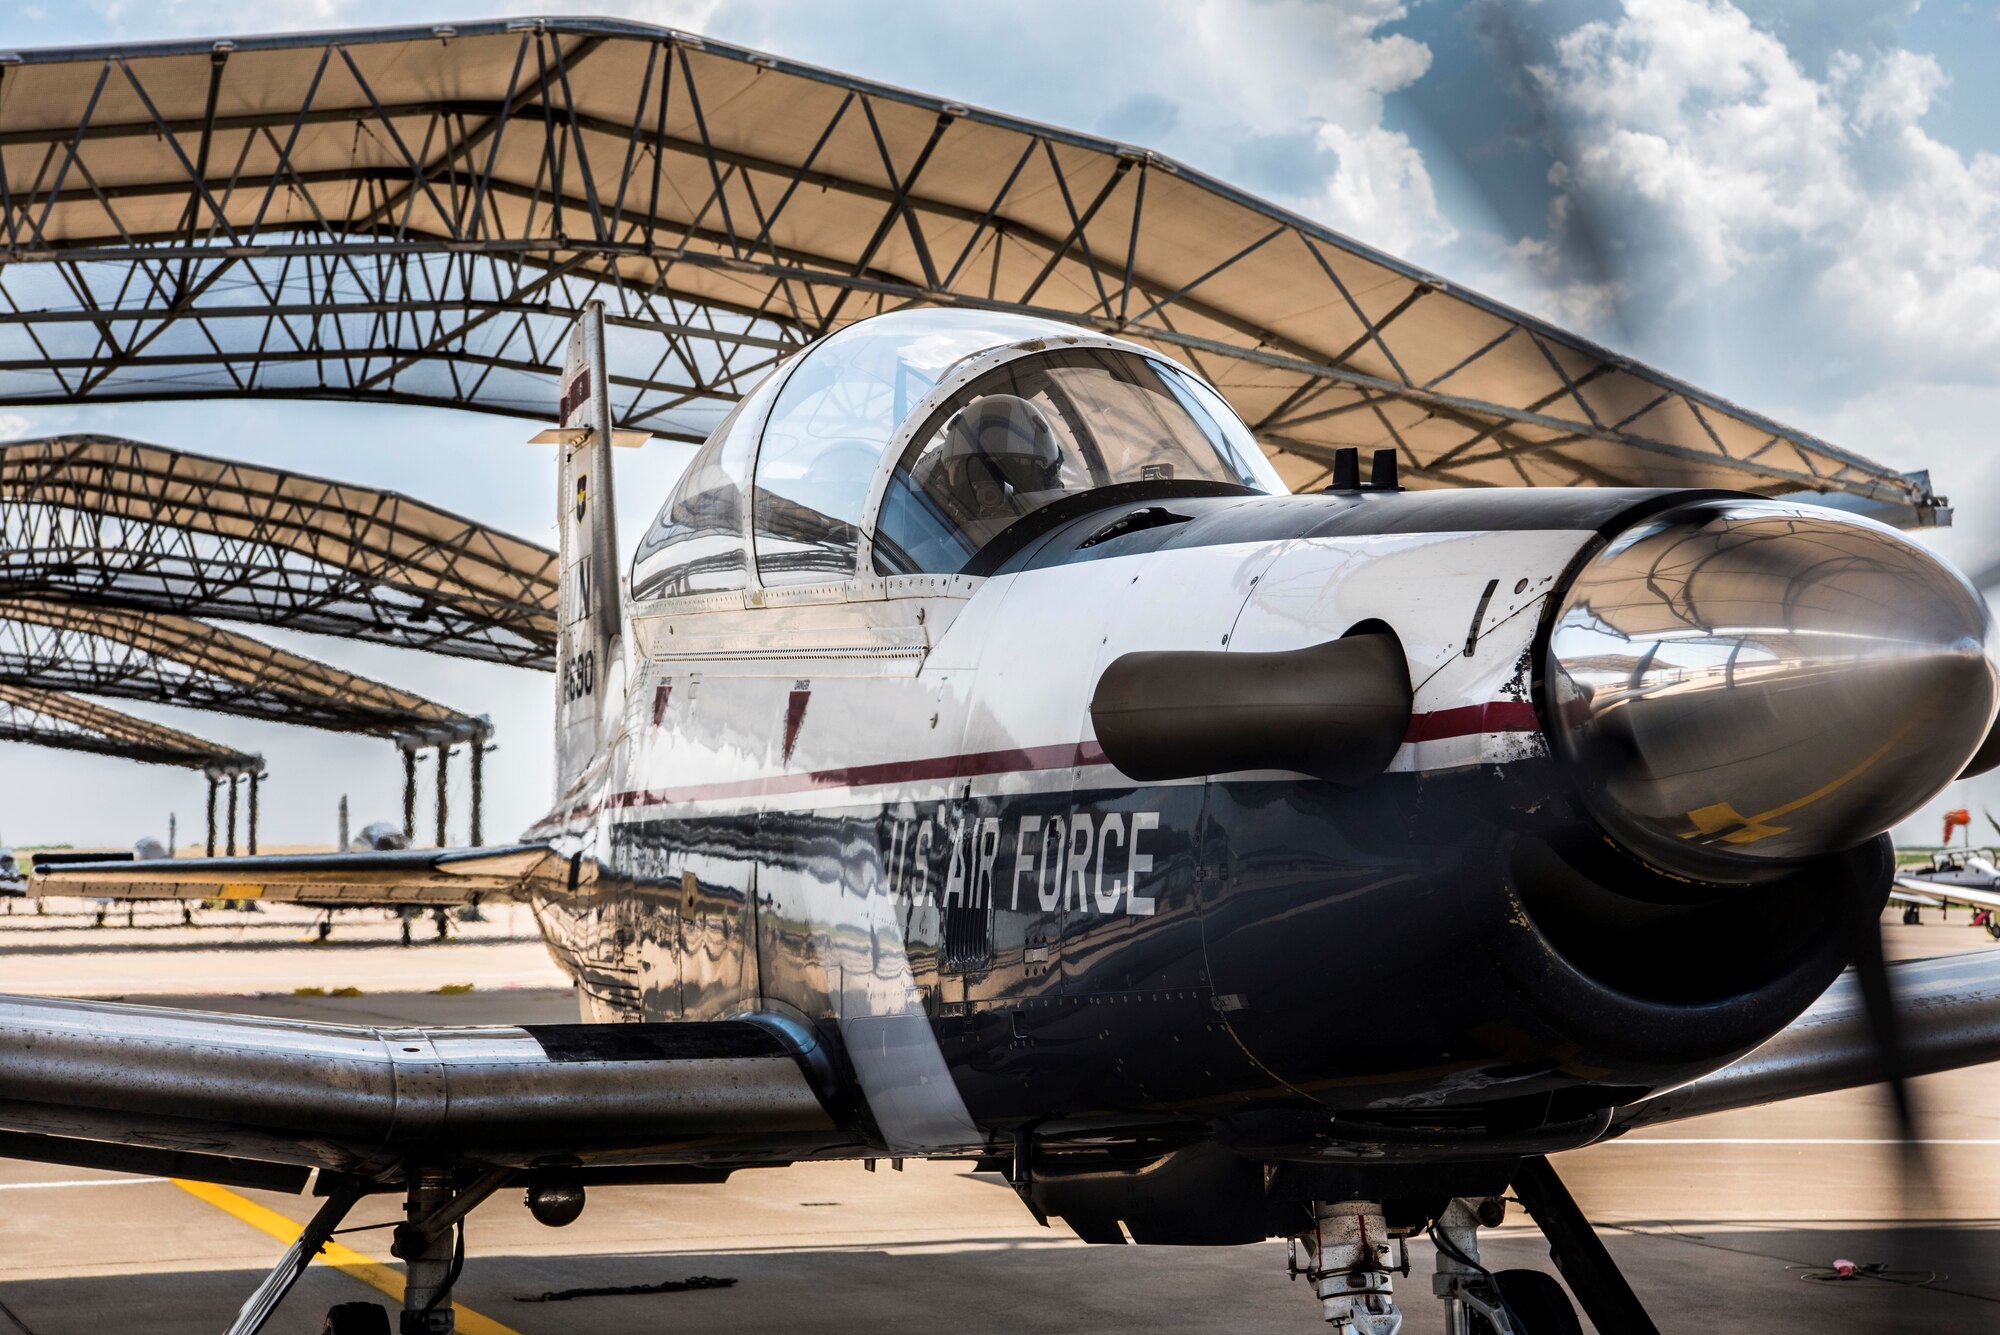 A student and instructor pilot prepare to taxi in a T-6A Texan II, June 13 at Vance Air Force Base, Oklahma. The T-6 is the first aircraft students attending Specialized Undergraduate Pilot Training learn to fly before moving on to more specialized aircraft.